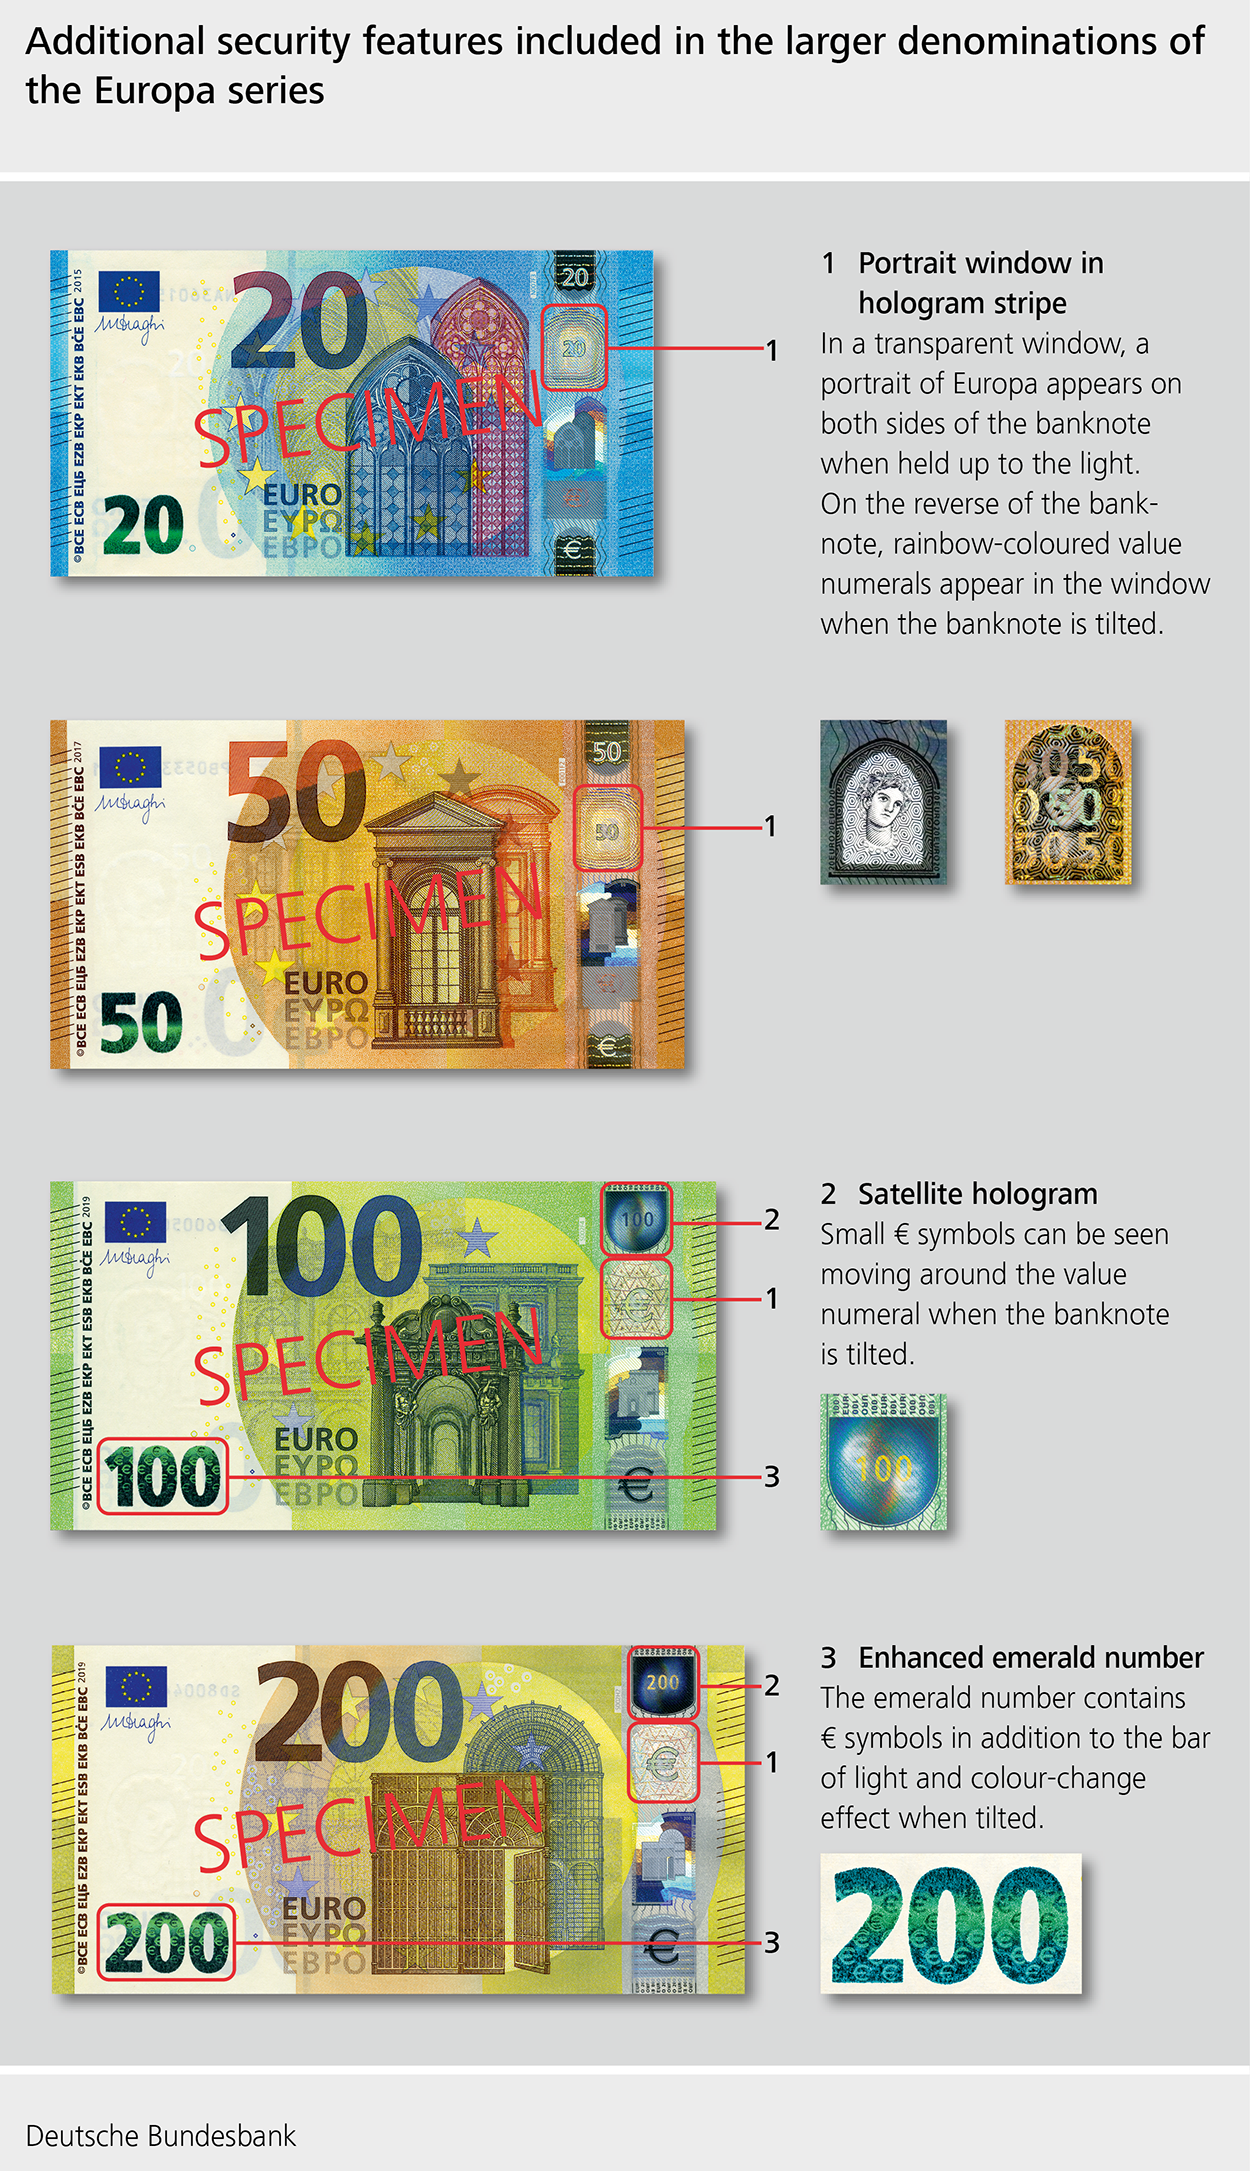 Additional security features of euro coins